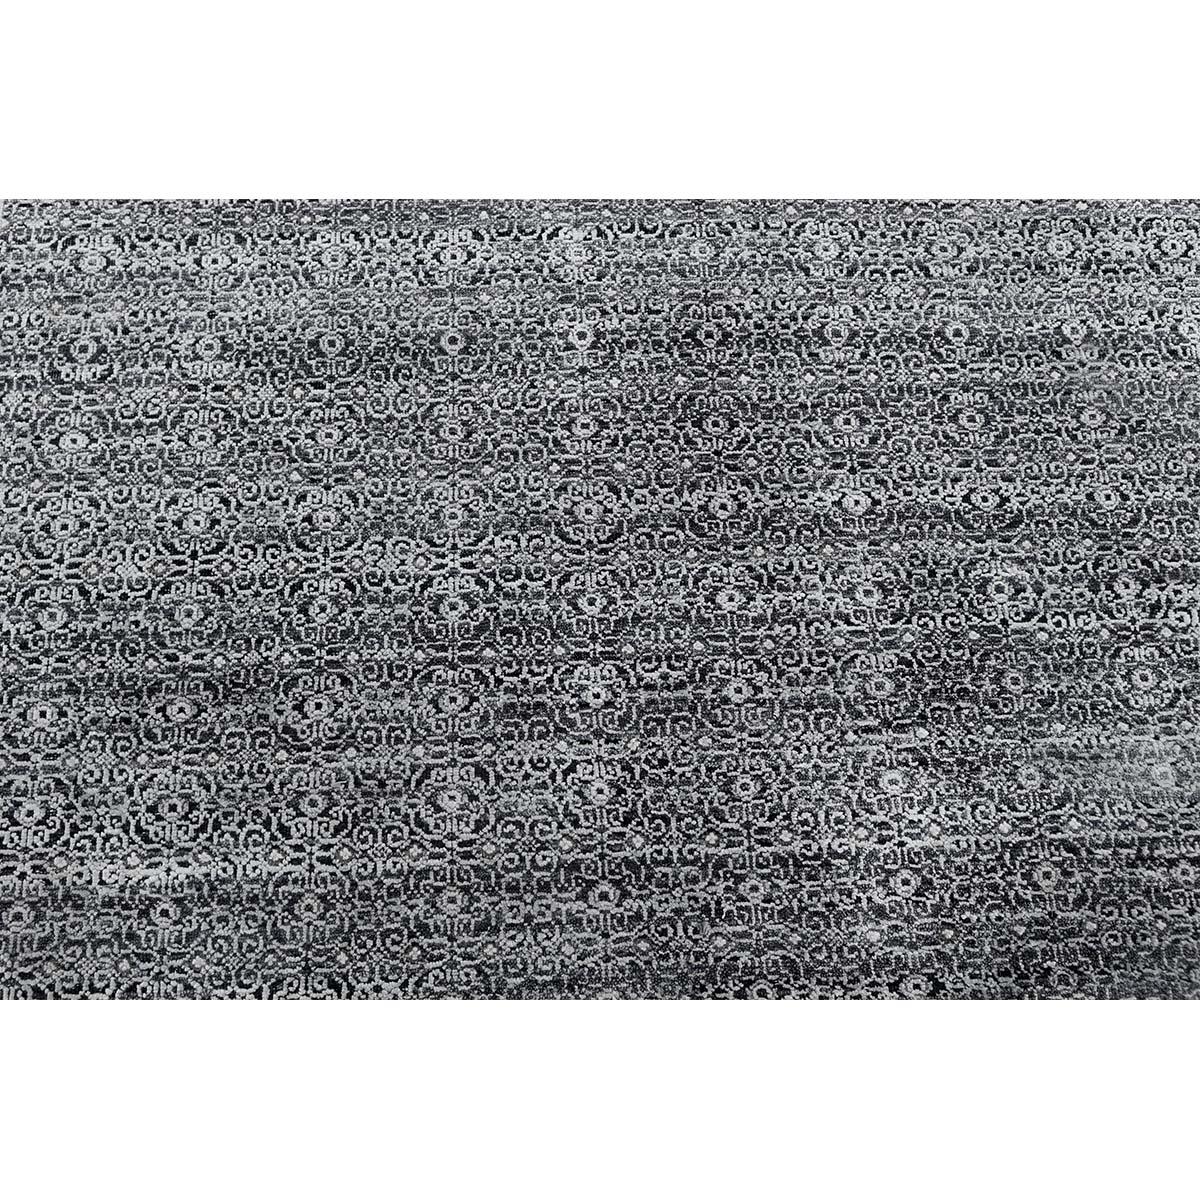 This elegantly hand woven rug is from India and woven from the finest wools and silks to create a soft and luxurious piece that will work well in so many different settings. Measures: 6'x9'.
 